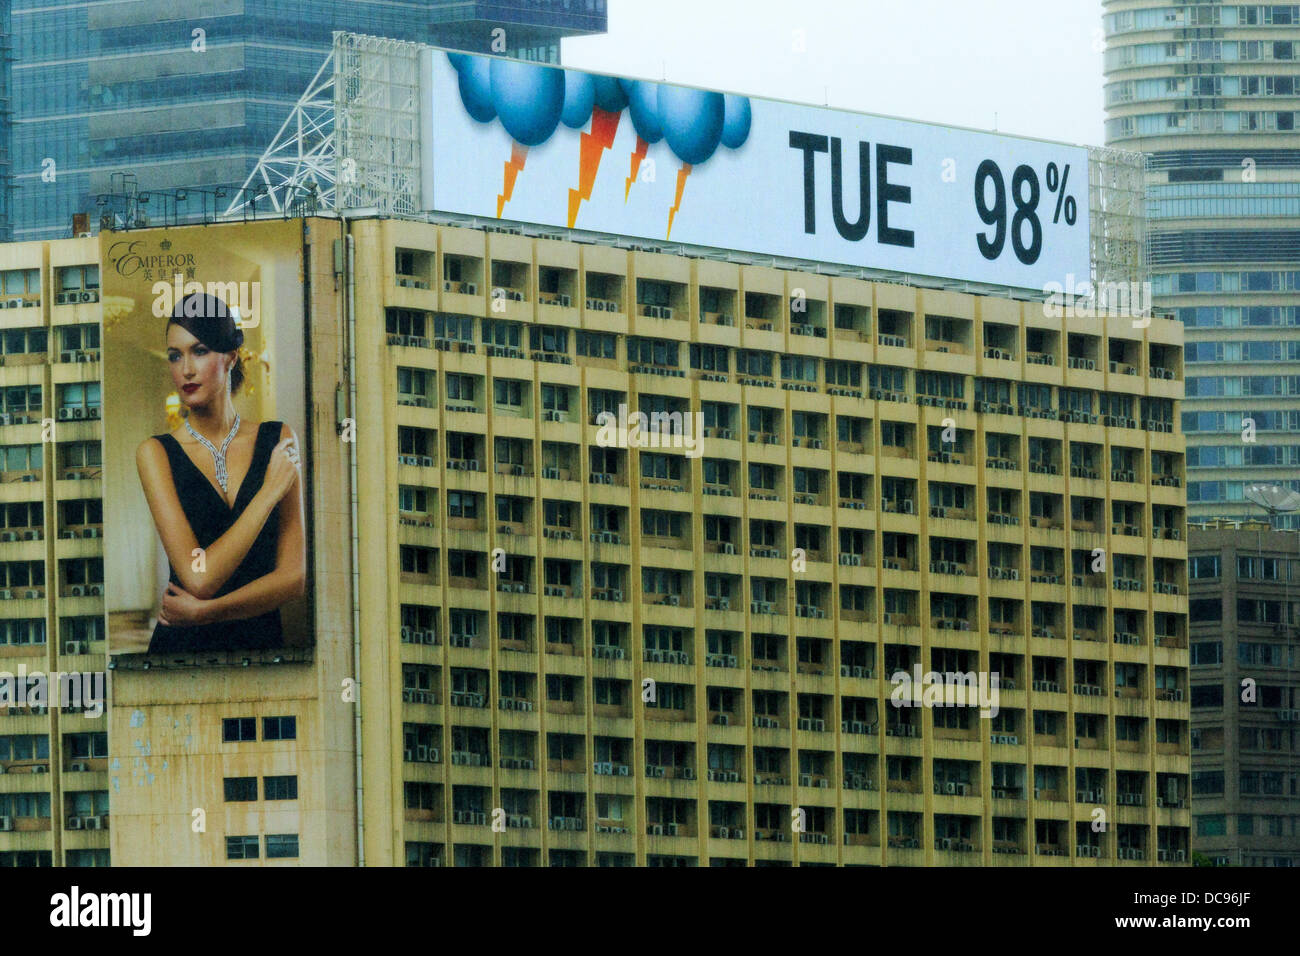 Hong Kong. 13th August 2013.  A building in Kowloon, Hong Kong shows the weather forecast as 98% of thunderstorms during Typhoon Utor. Typhoon Utor (known in the Philippines as Typhoon Labuyo) is an active tropical cyclone located over the South China Sea. The eleventh named storm and second typhoon of the 2013 typhoon season, Utor formed from a tropical depression on August 8. The depression was upgraded to Tropical Storm Utor the following day, and to typhoon intensity just a few hours afterwards. Credit:  ZUMA Press, Inc./Alamy Live News Stock Photo